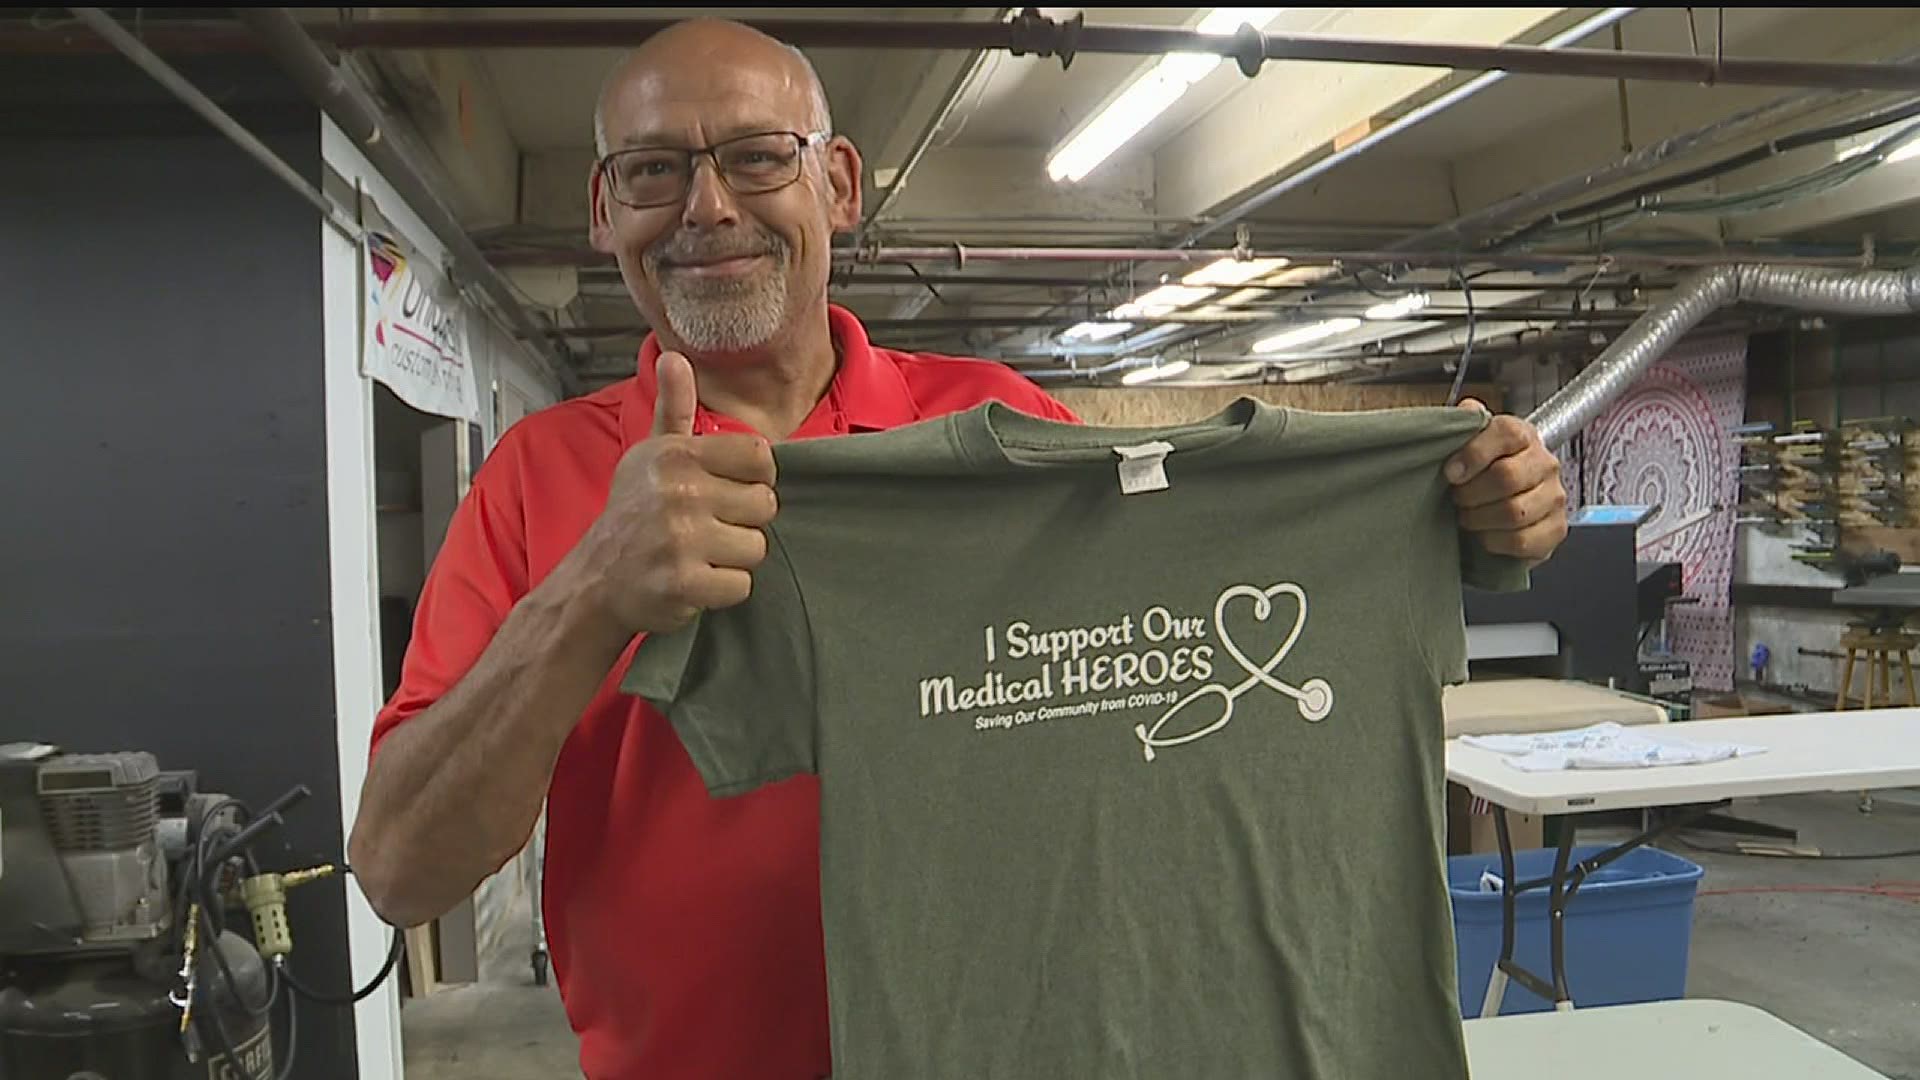 A Lancaster County man is designing and selling t-shirts to support nurses and doctors working directly with COVID-19 patients.